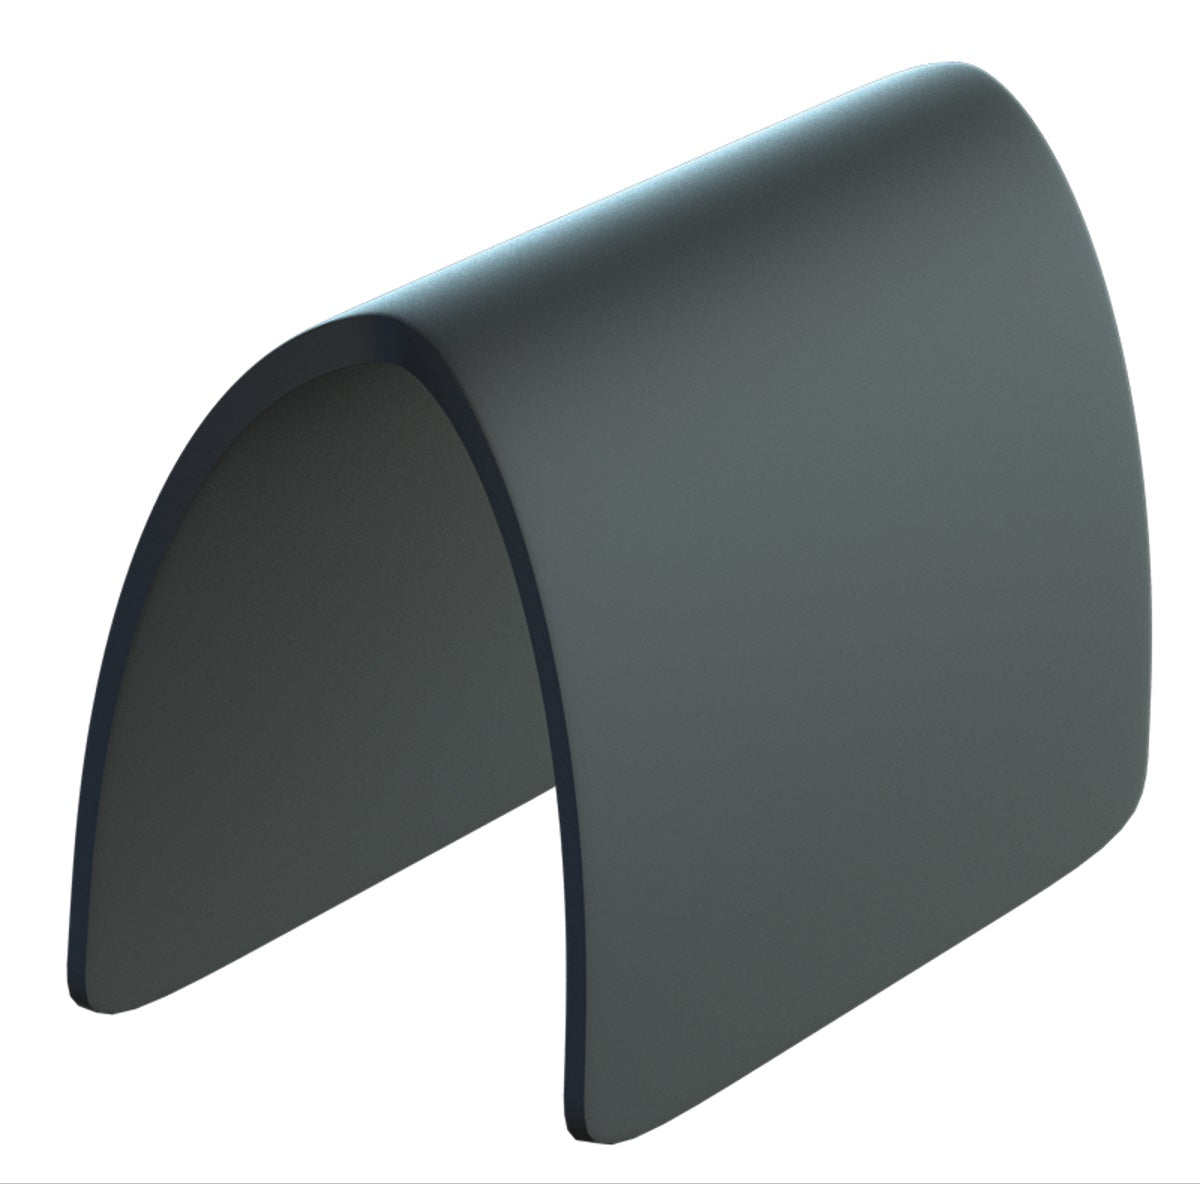 Optrel Panoramaxx Nose Rest Pad (5003.600)